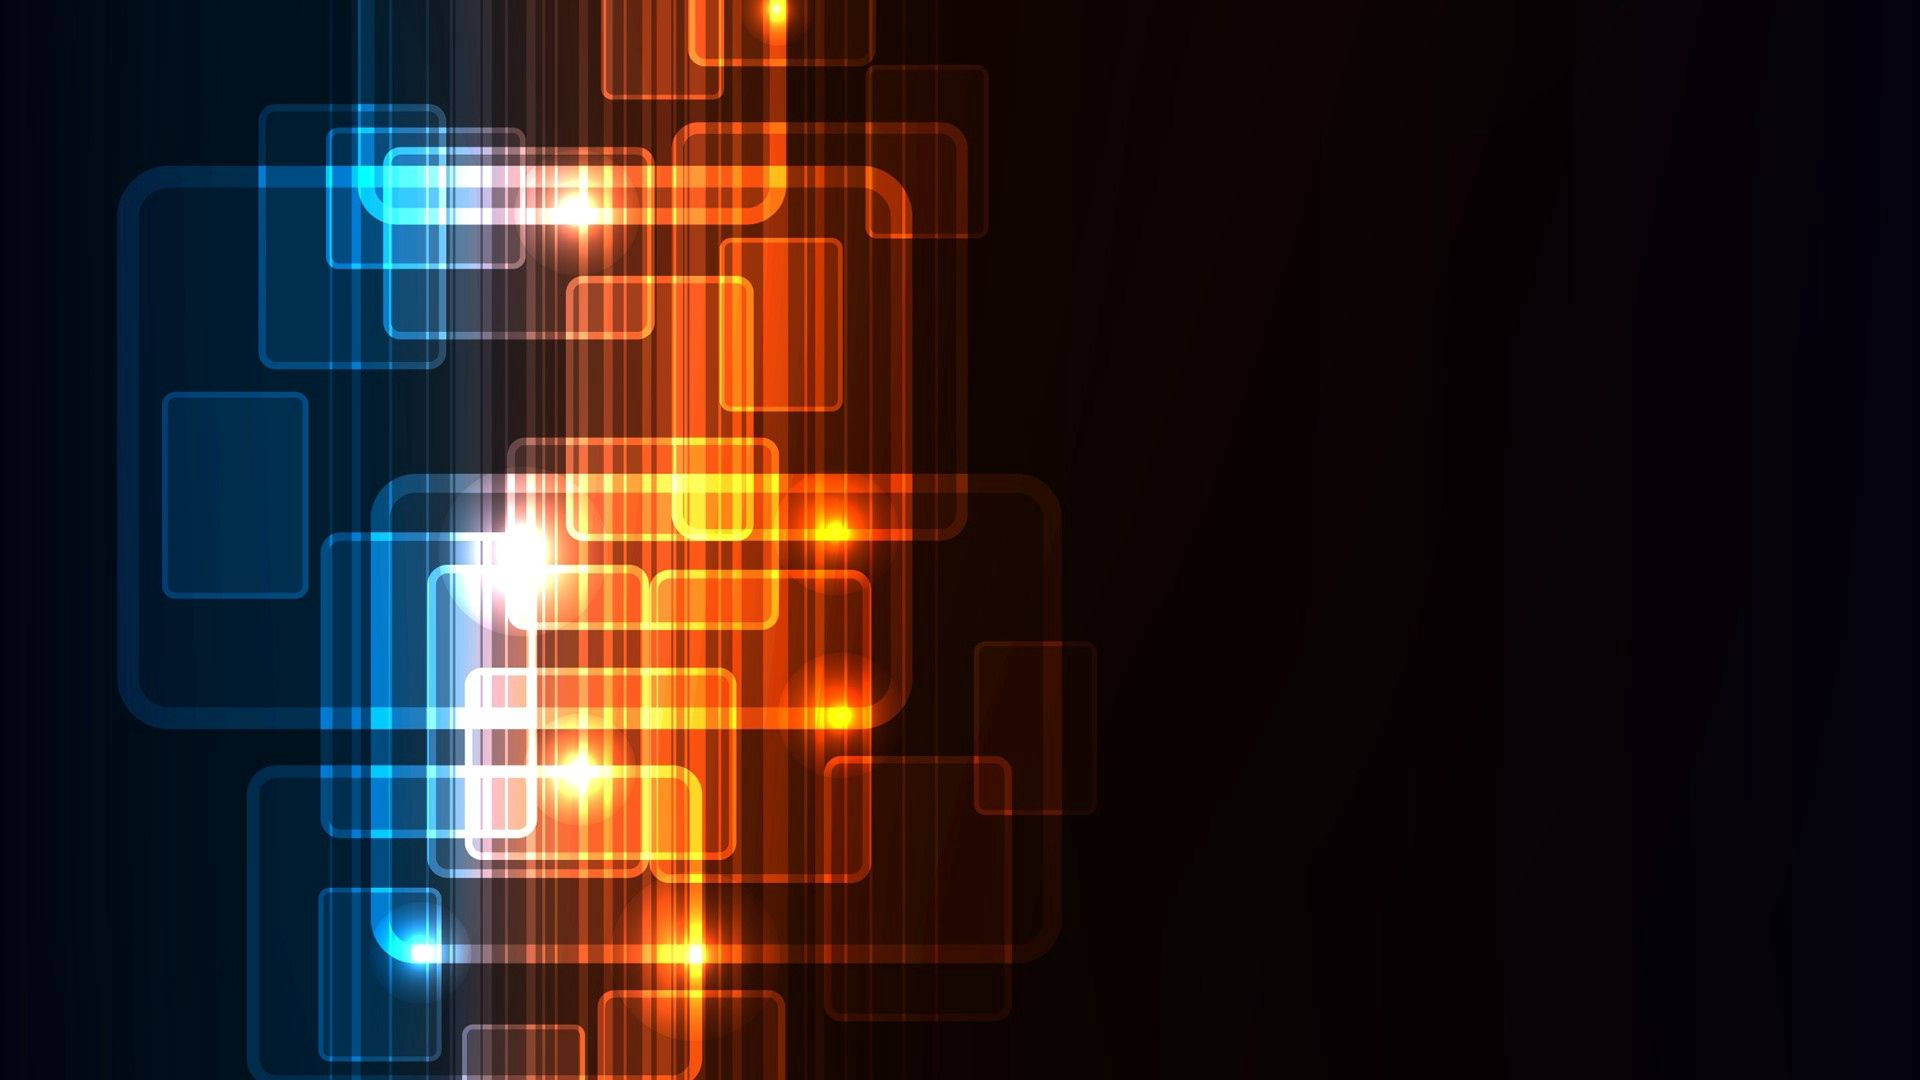 Abstract Glowing Rectangles Wallpaper